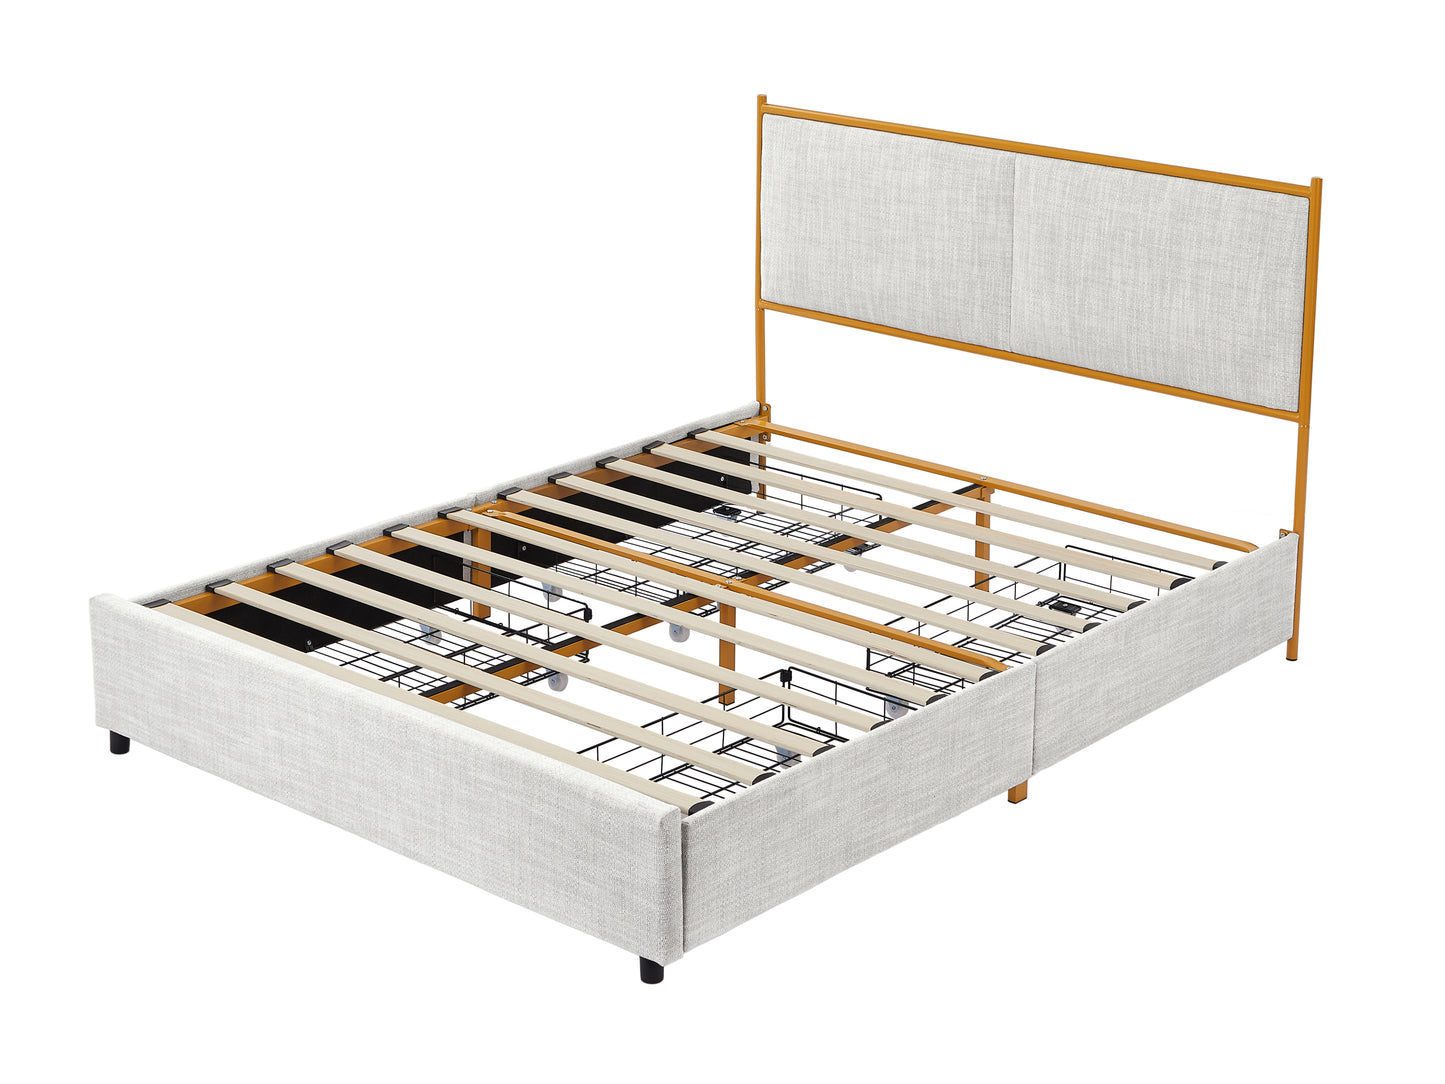 Queen size Upholstered Platform Bed with 4 Storage Drawers, Classic Steamed Bread Shaped Backrest, Light Gray